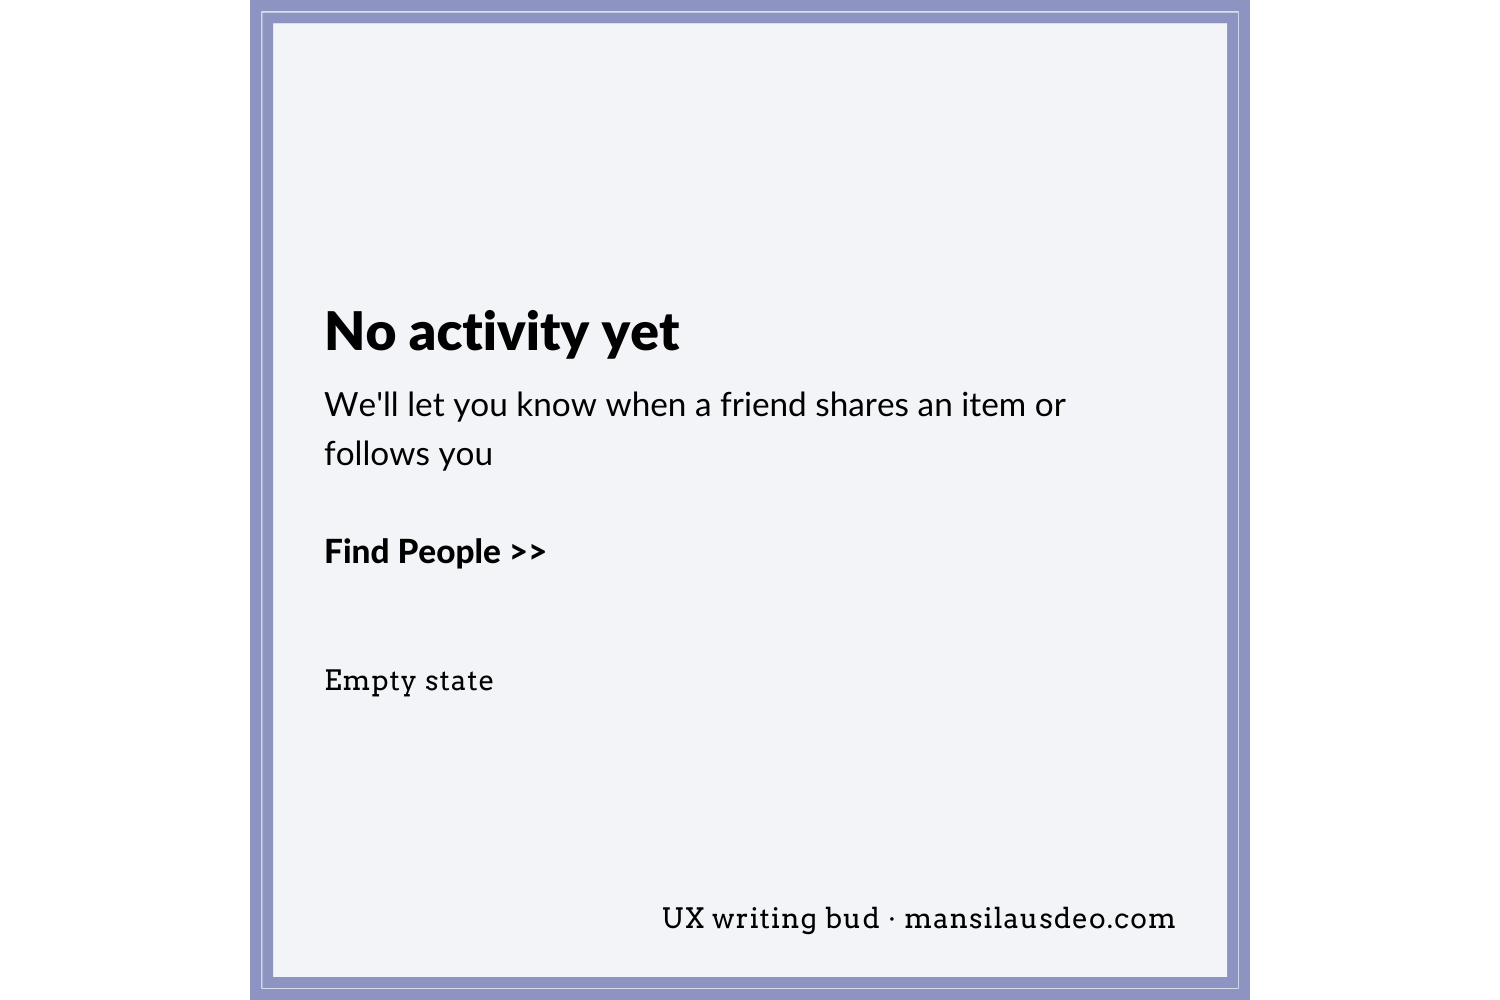 Copy for empty state No activity yet We'll let you know when a friend shares an item or follows you Find People >> UX Writing Bud